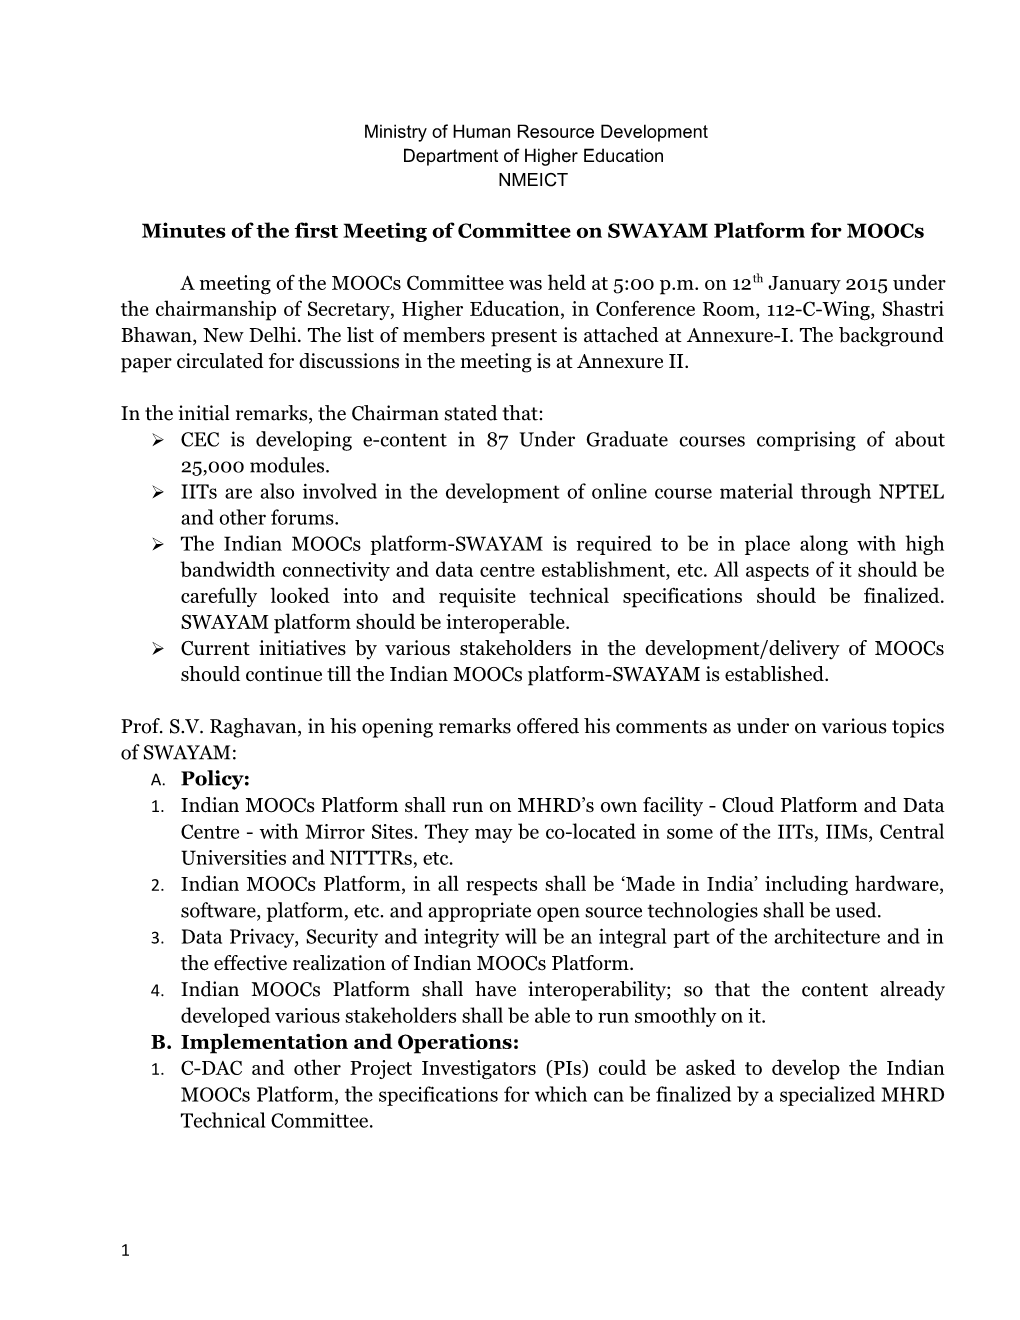 Minutes of the First Meeting of Committee on SWAYAM Platform for Moocs